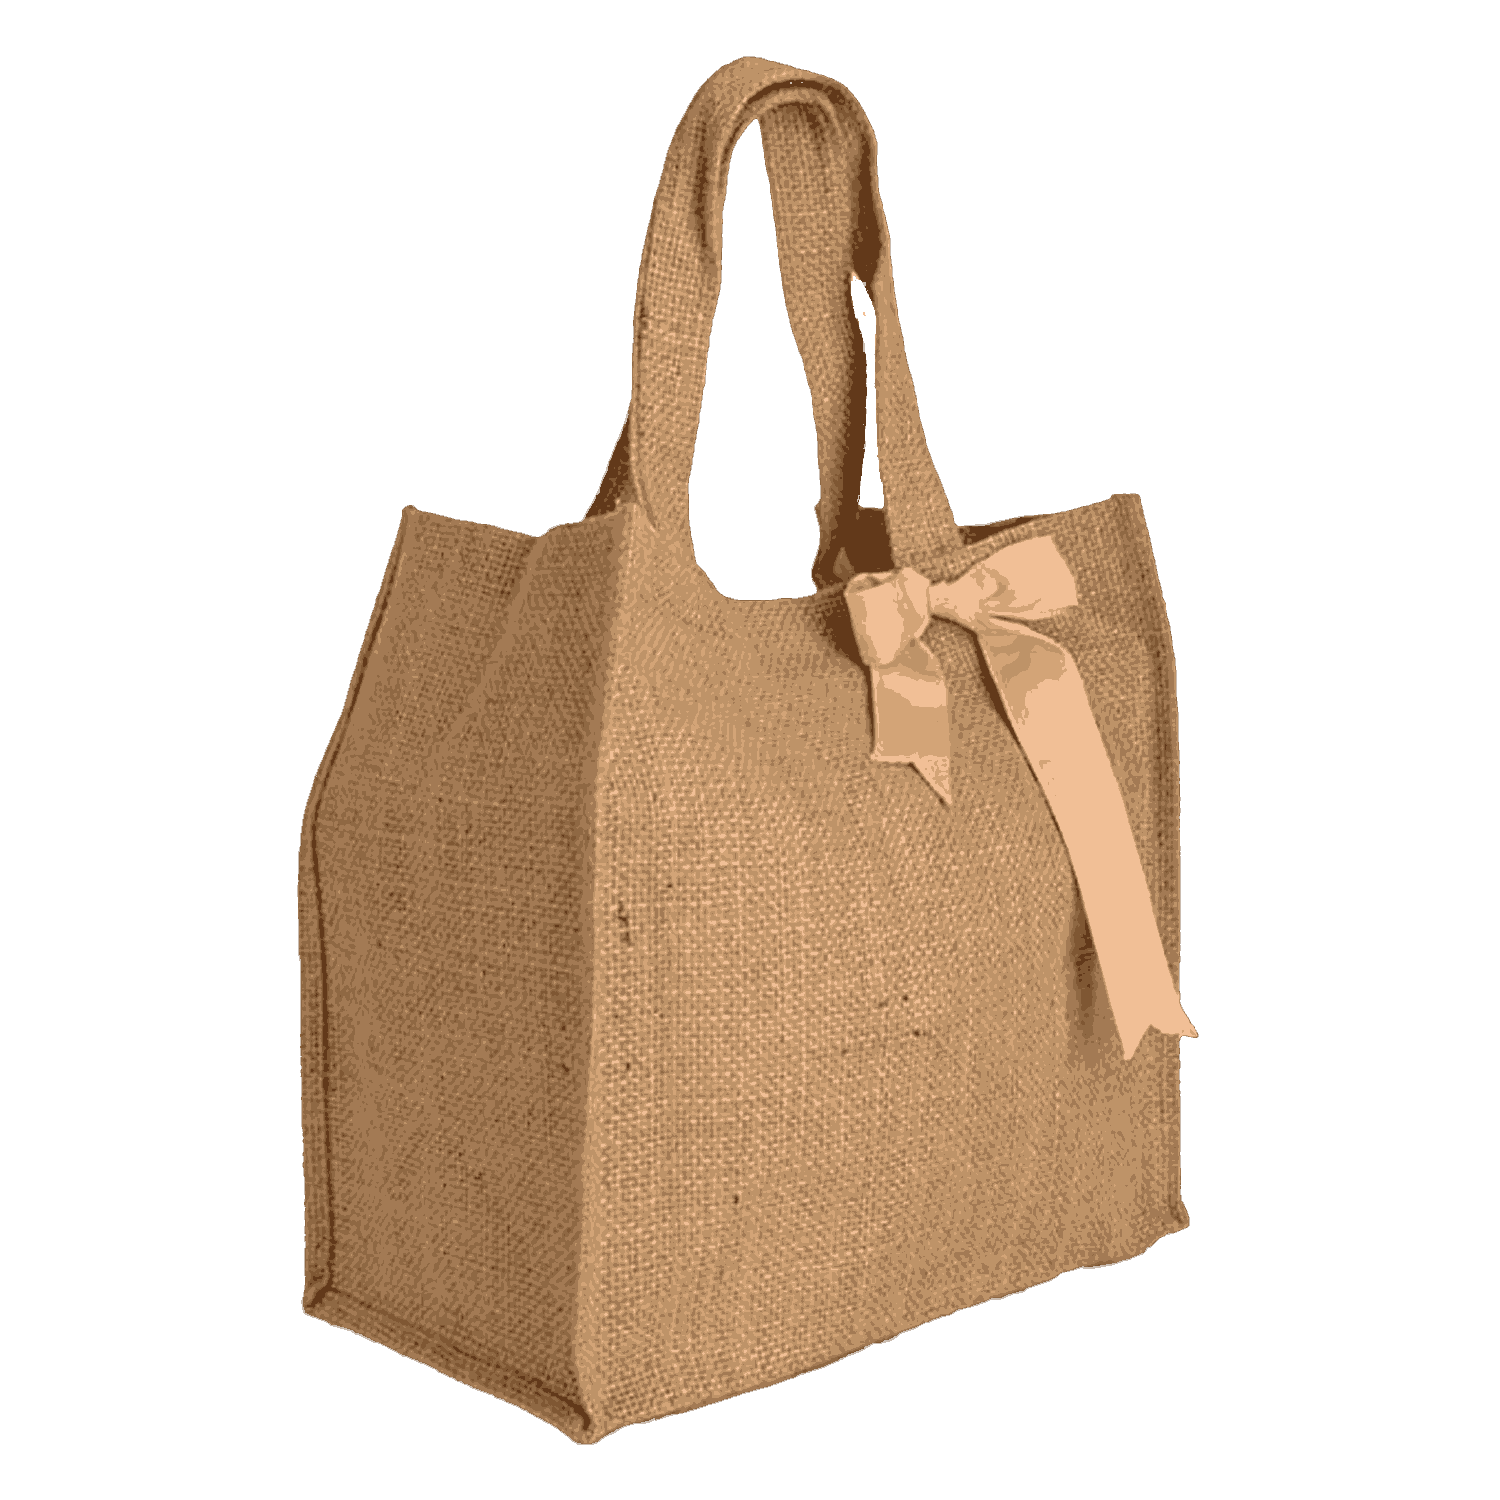 Jute Bag for Thamboolam Giveaway - W2148 - W2148 at Rs 53.10 | Gifts for  all occasions by Wedtree